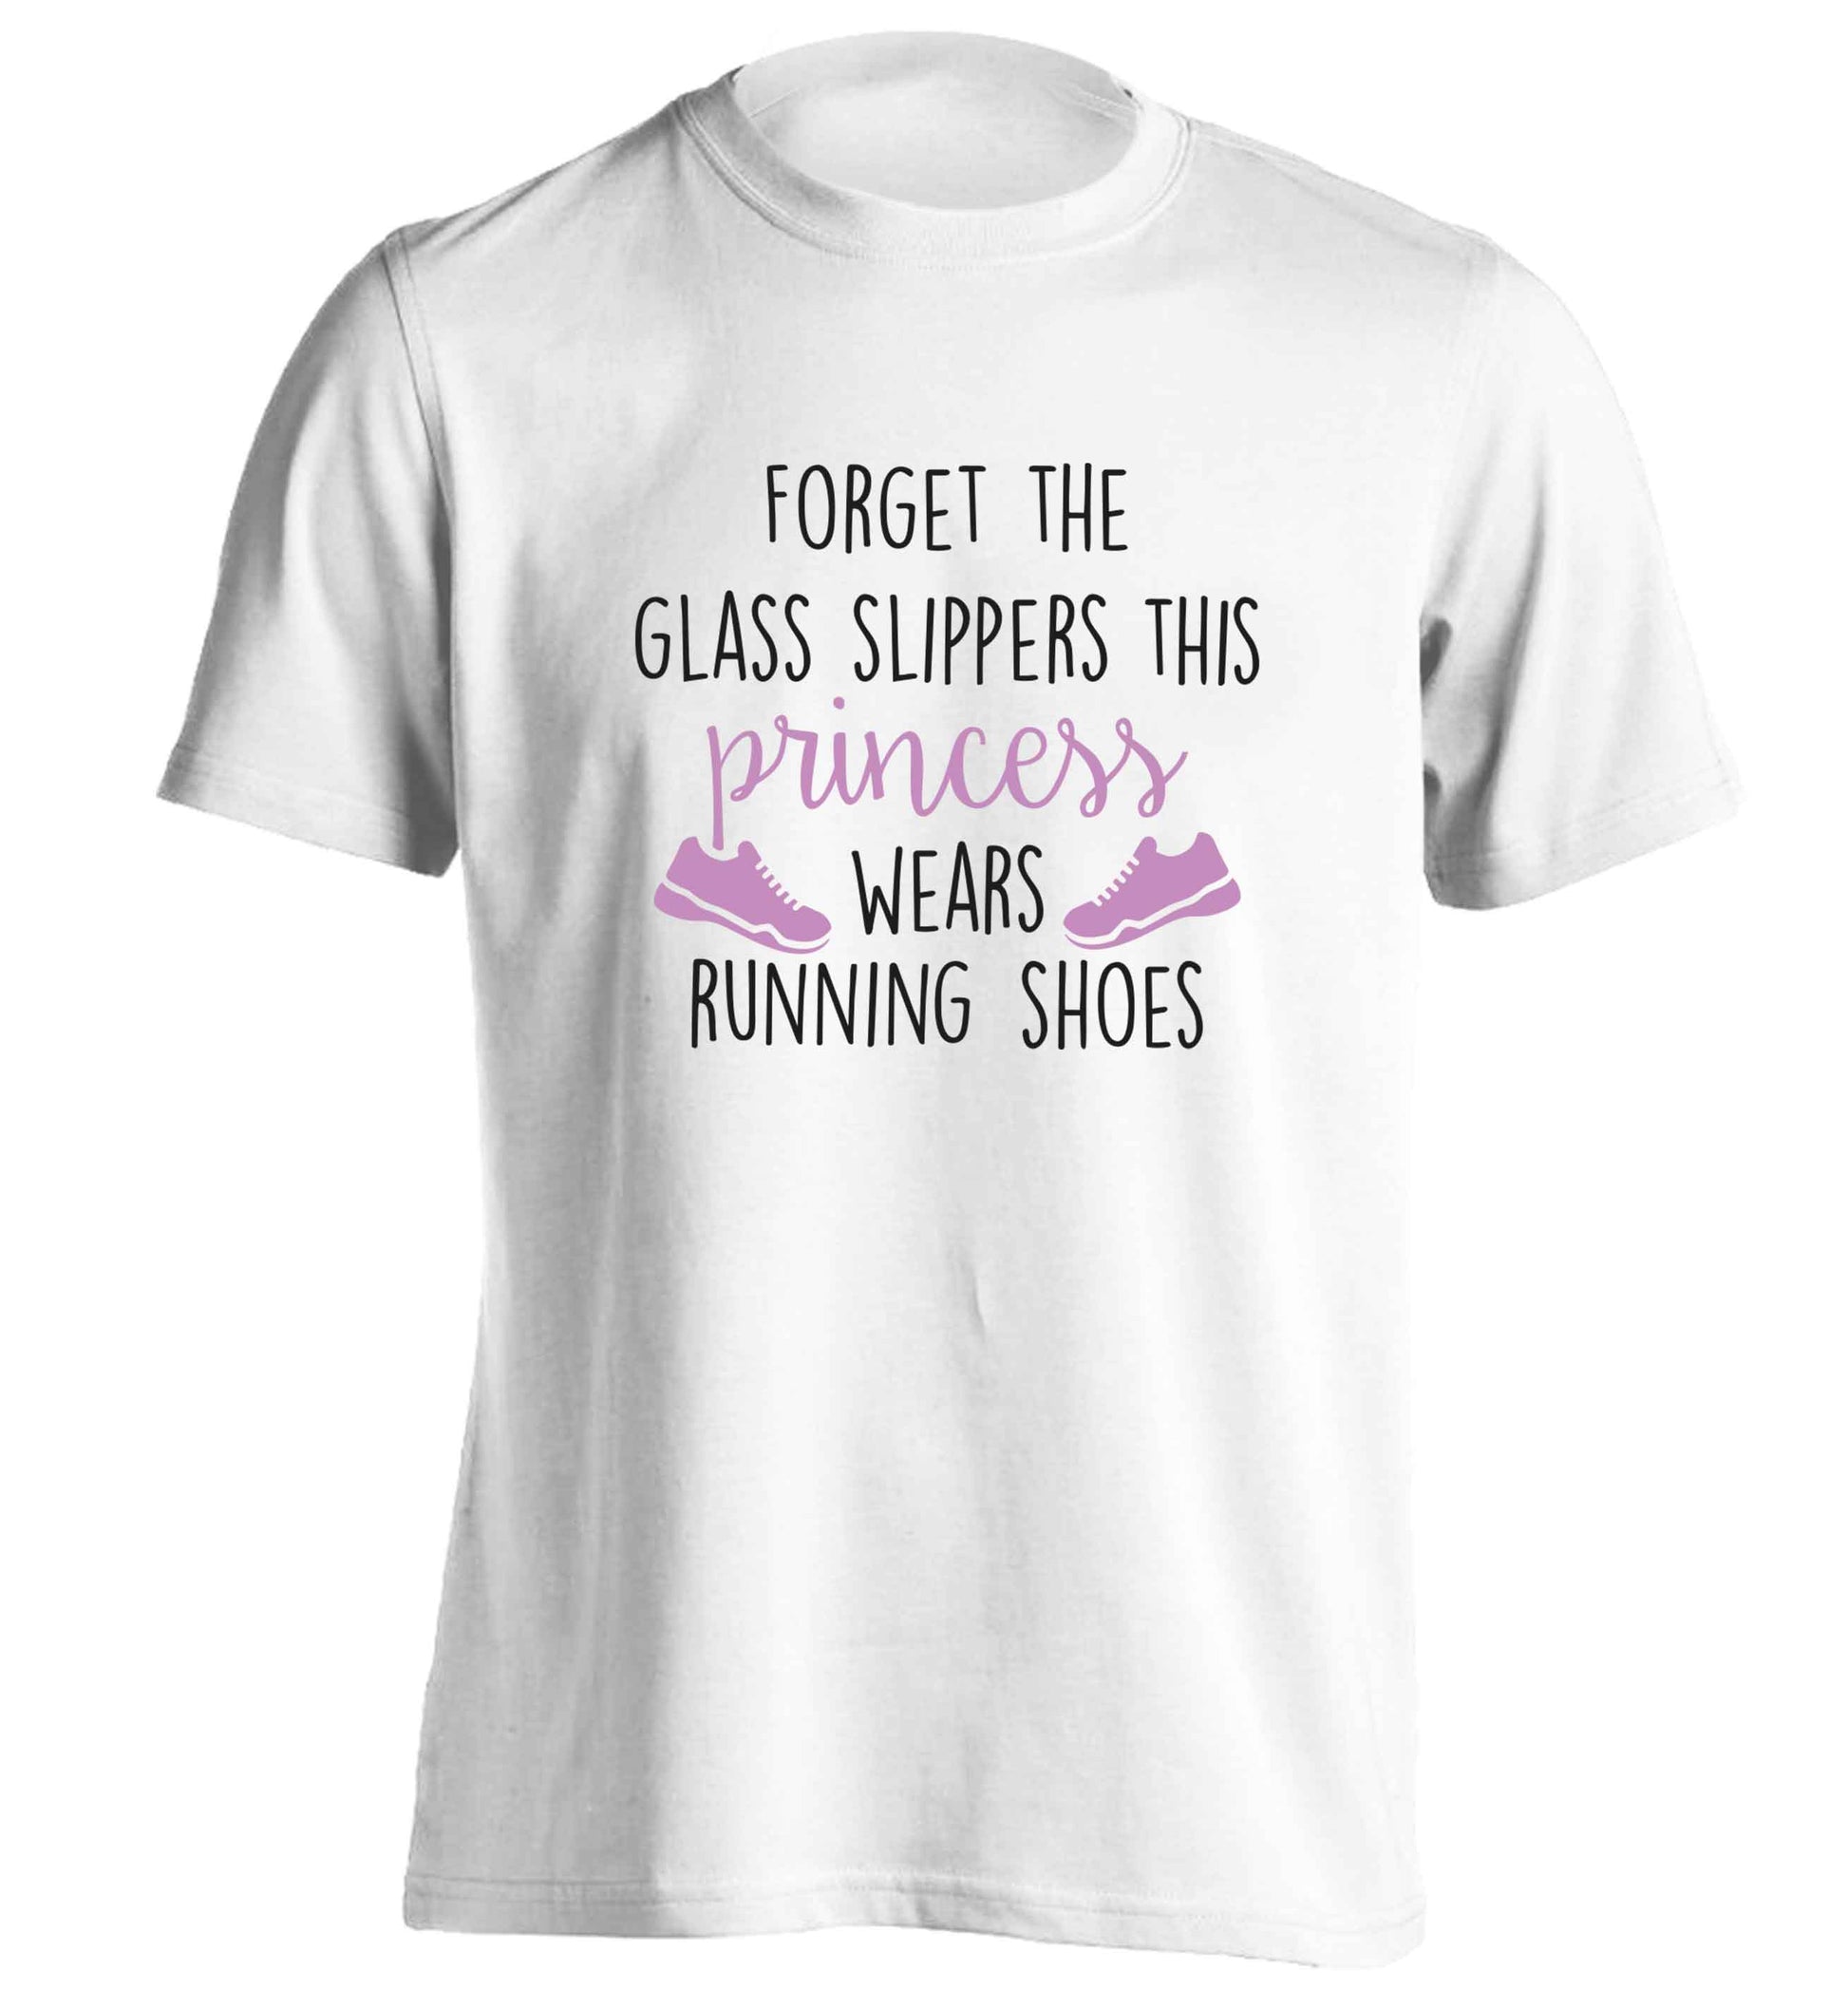 Forget the glass slippers this princess wears running shoes adults unisex white Tshirt 2XL